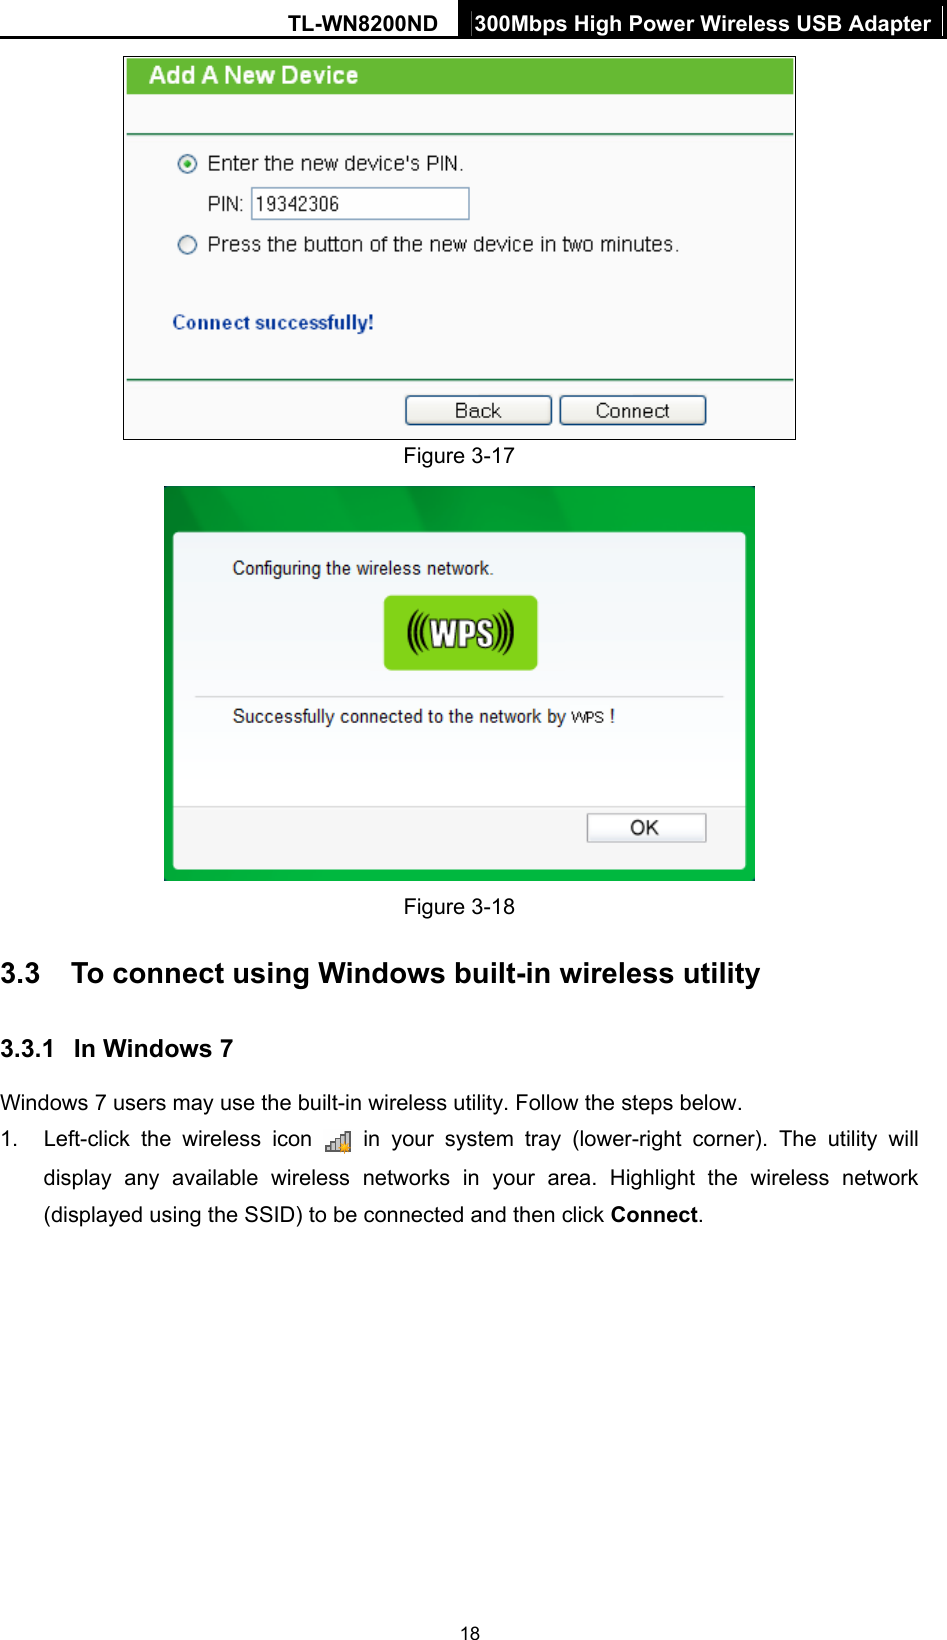 TL-WN8200ND  300Mbps High Power Wireless USB Adapter  18 Figure 3-17  Figure 3-18 3.3  To connect using Windows built-in wireless utility 3.3.1  In Windows 7 Windows 7 users may use the built-in wireless utility. Follow the steps below. 1.  Left-click the wireless icon   in your system tray (lower-right corner). The utility will display any available wireless networks in your area. Highlight the wireless network (displayed using the SSID) to be connected and then click Connect.  